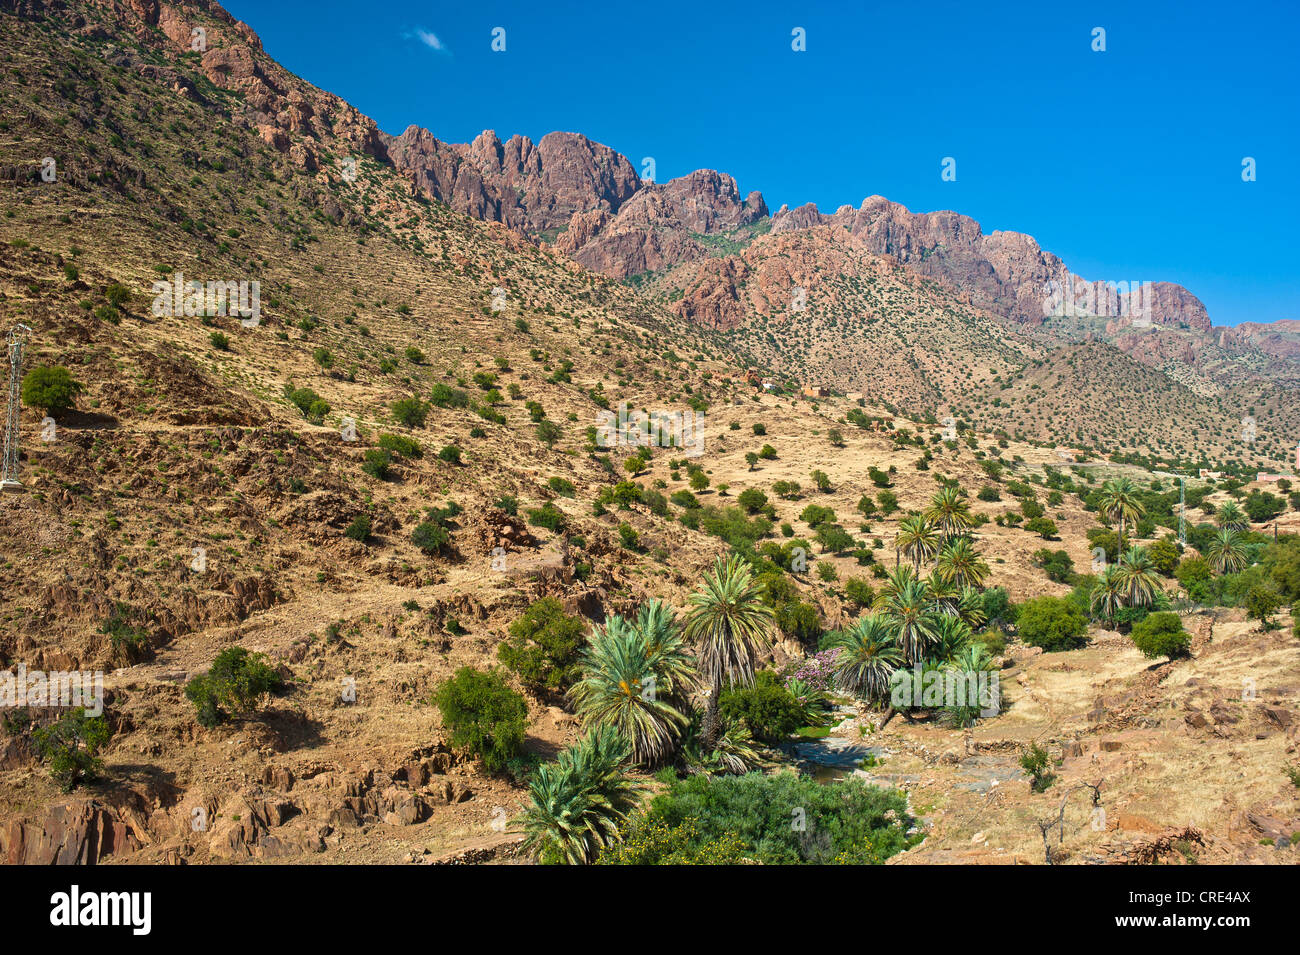 Typical mountain landscape with a dry river bed where Argan Trees (Argania spinosa) and Date Palms (Phoenix dactylifera) grow Stock Photo